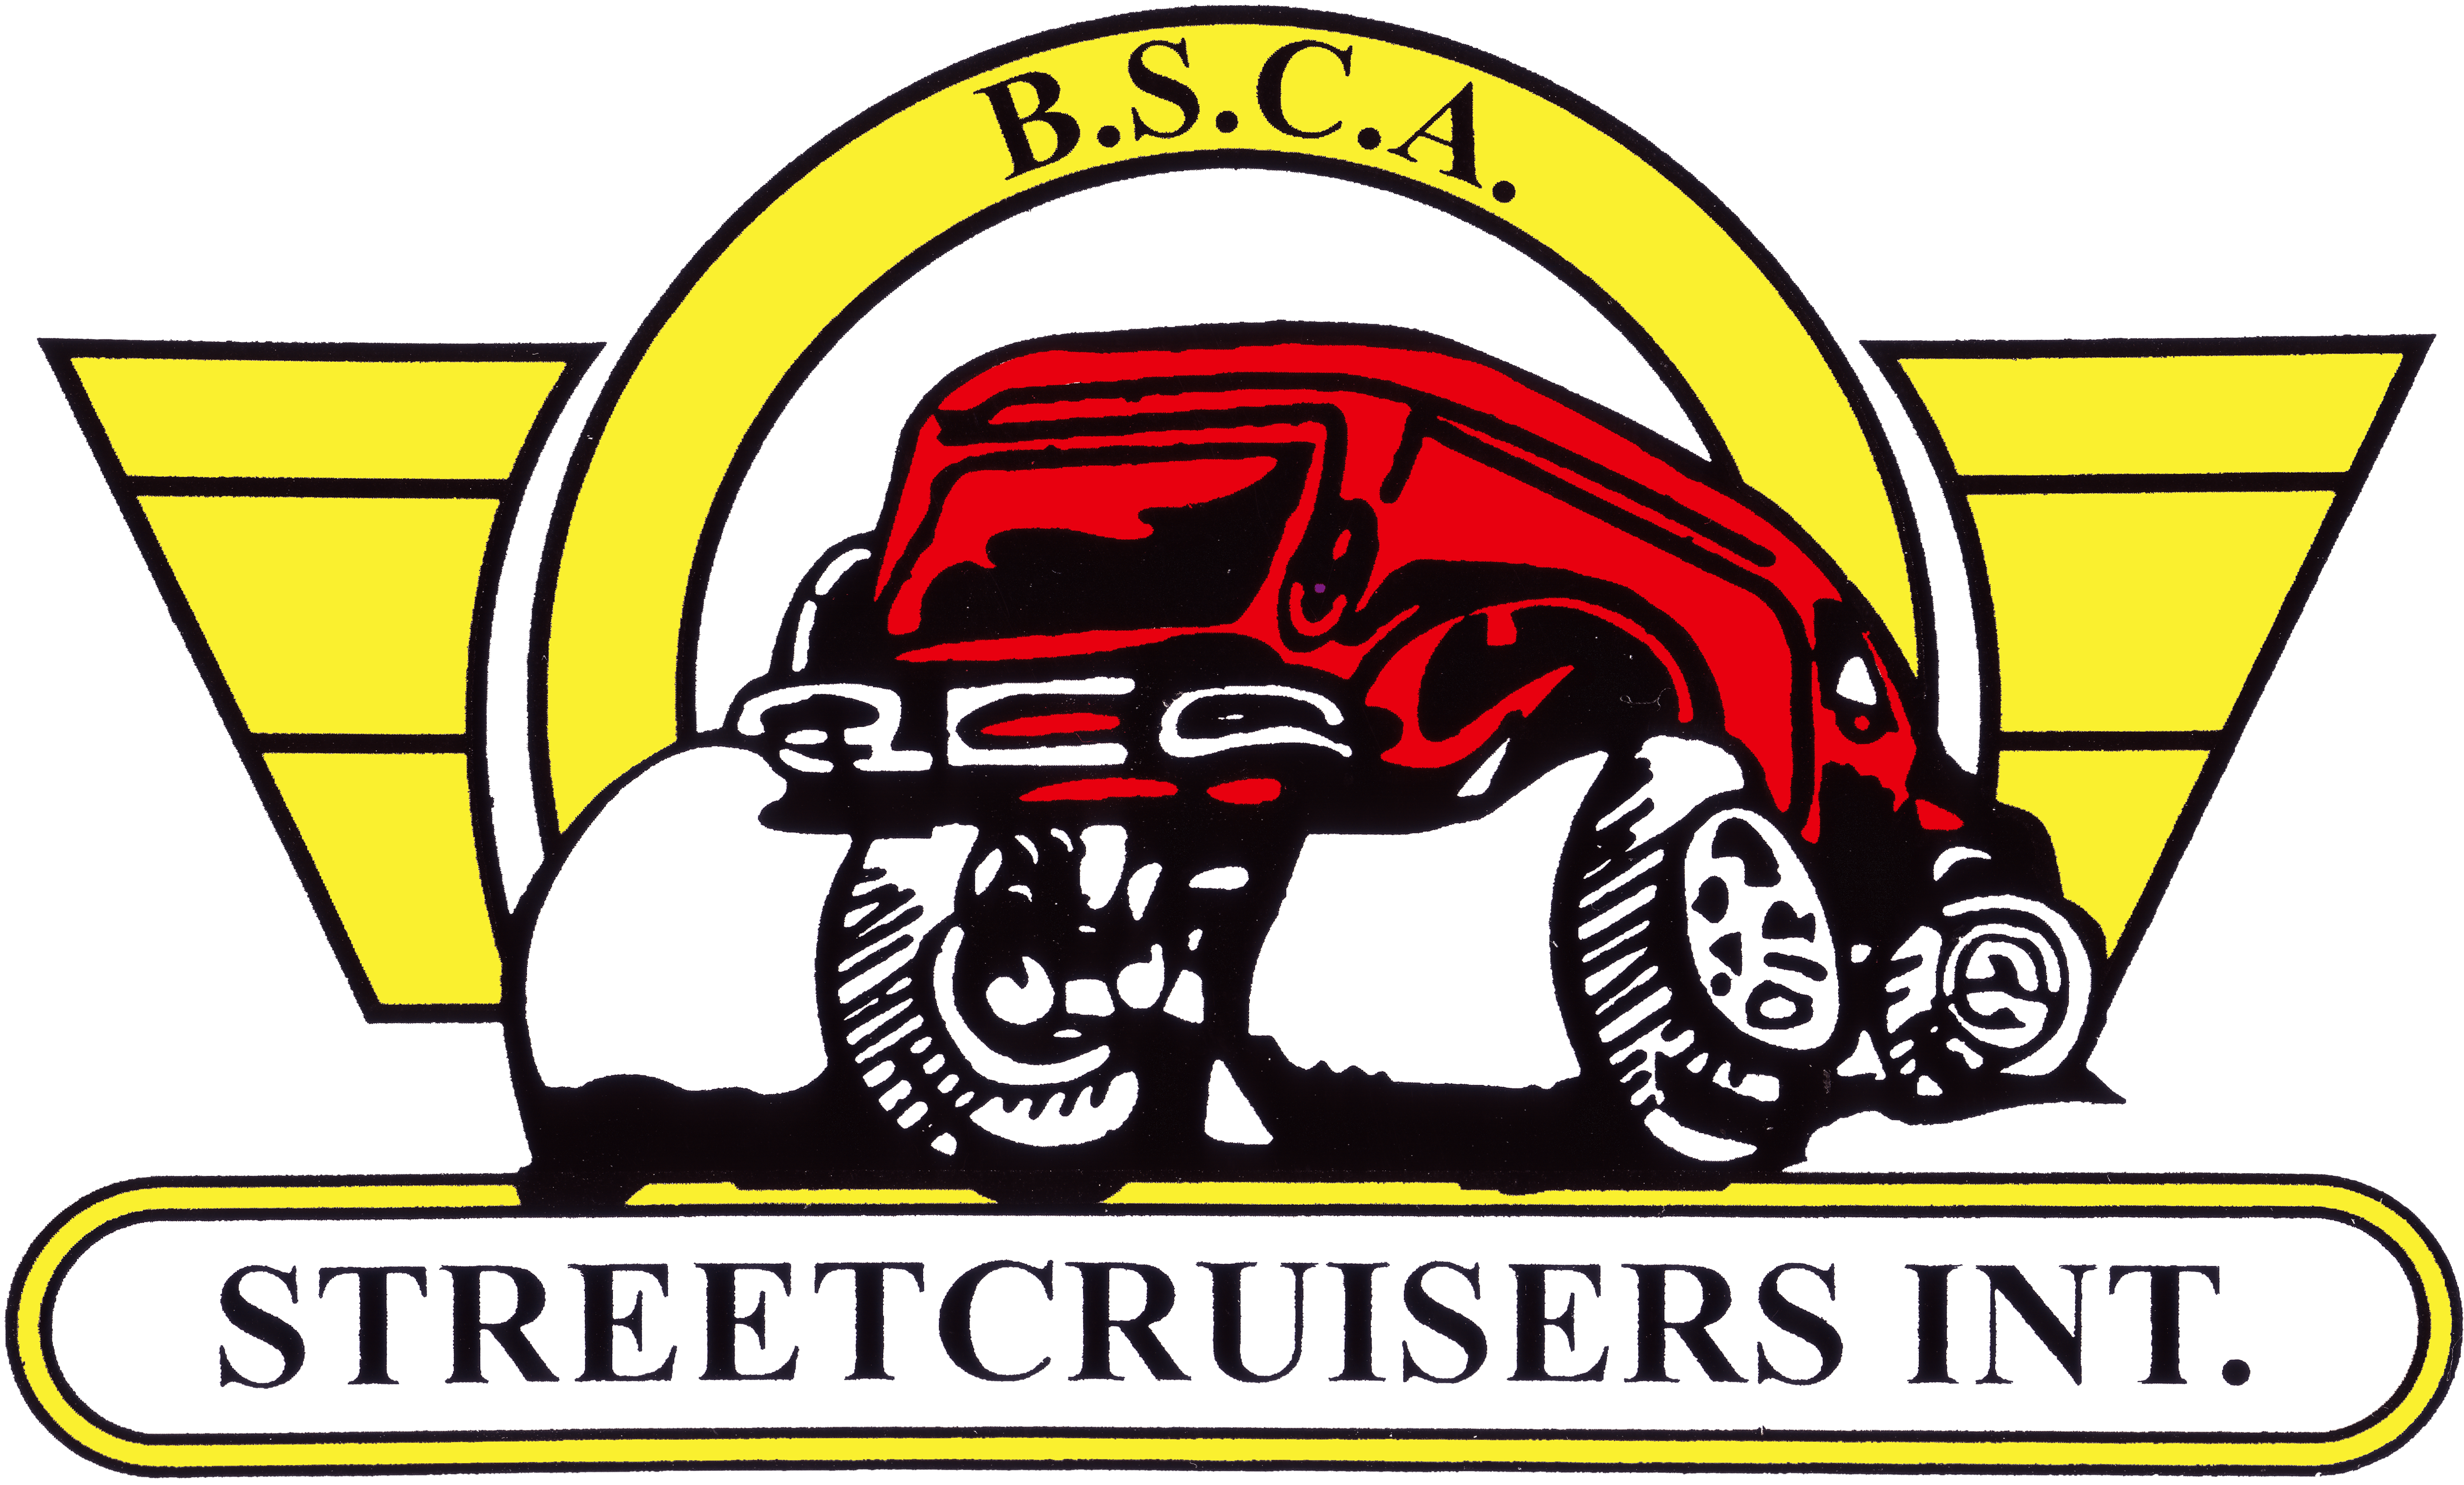 B.S.C.A. Streetcruisers Int. vzw